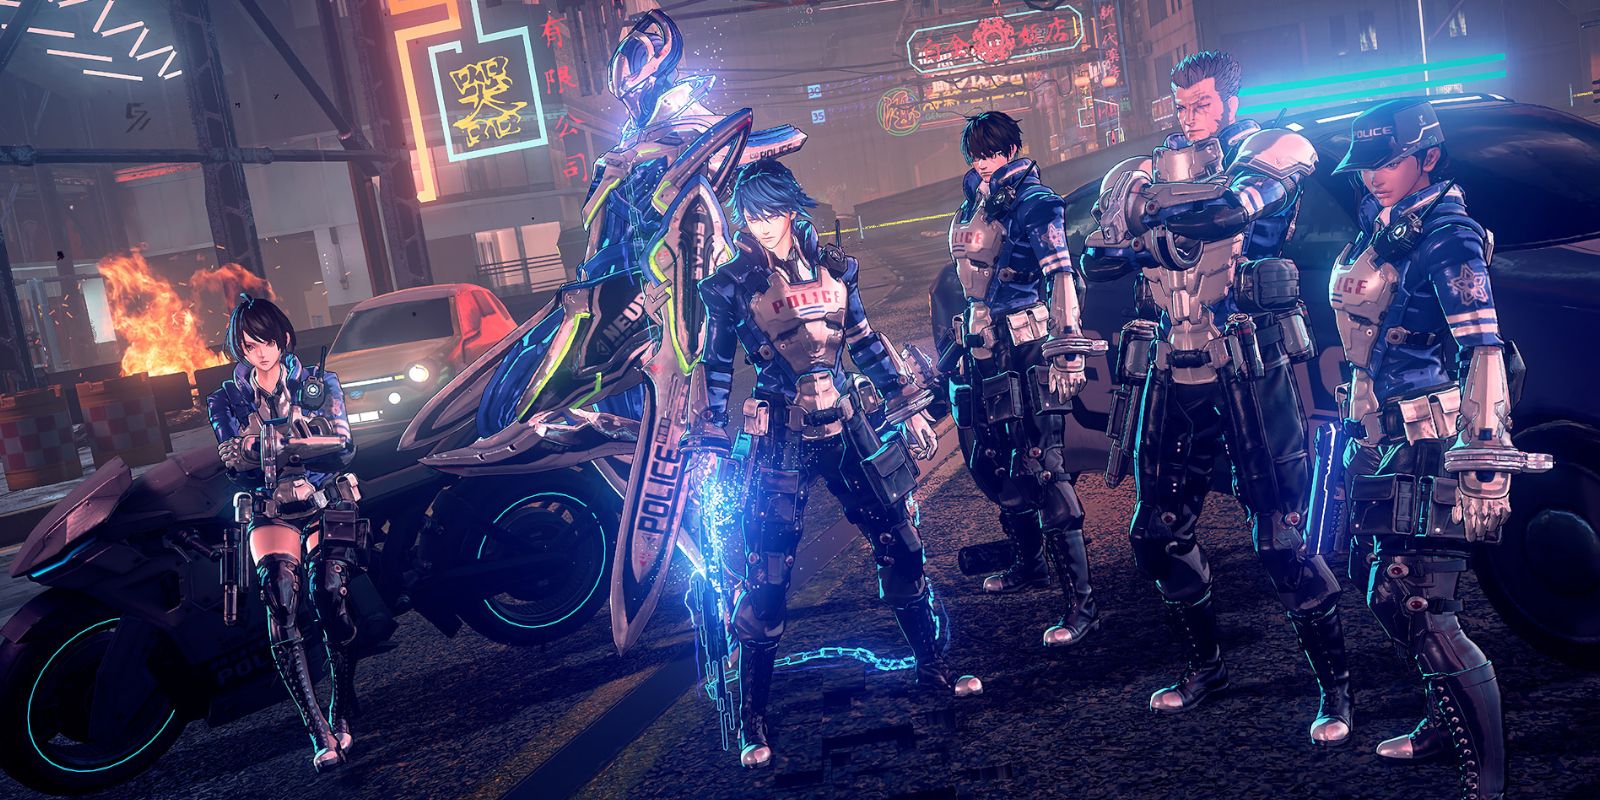 Astral Chain screenshot containing the main cast of characters